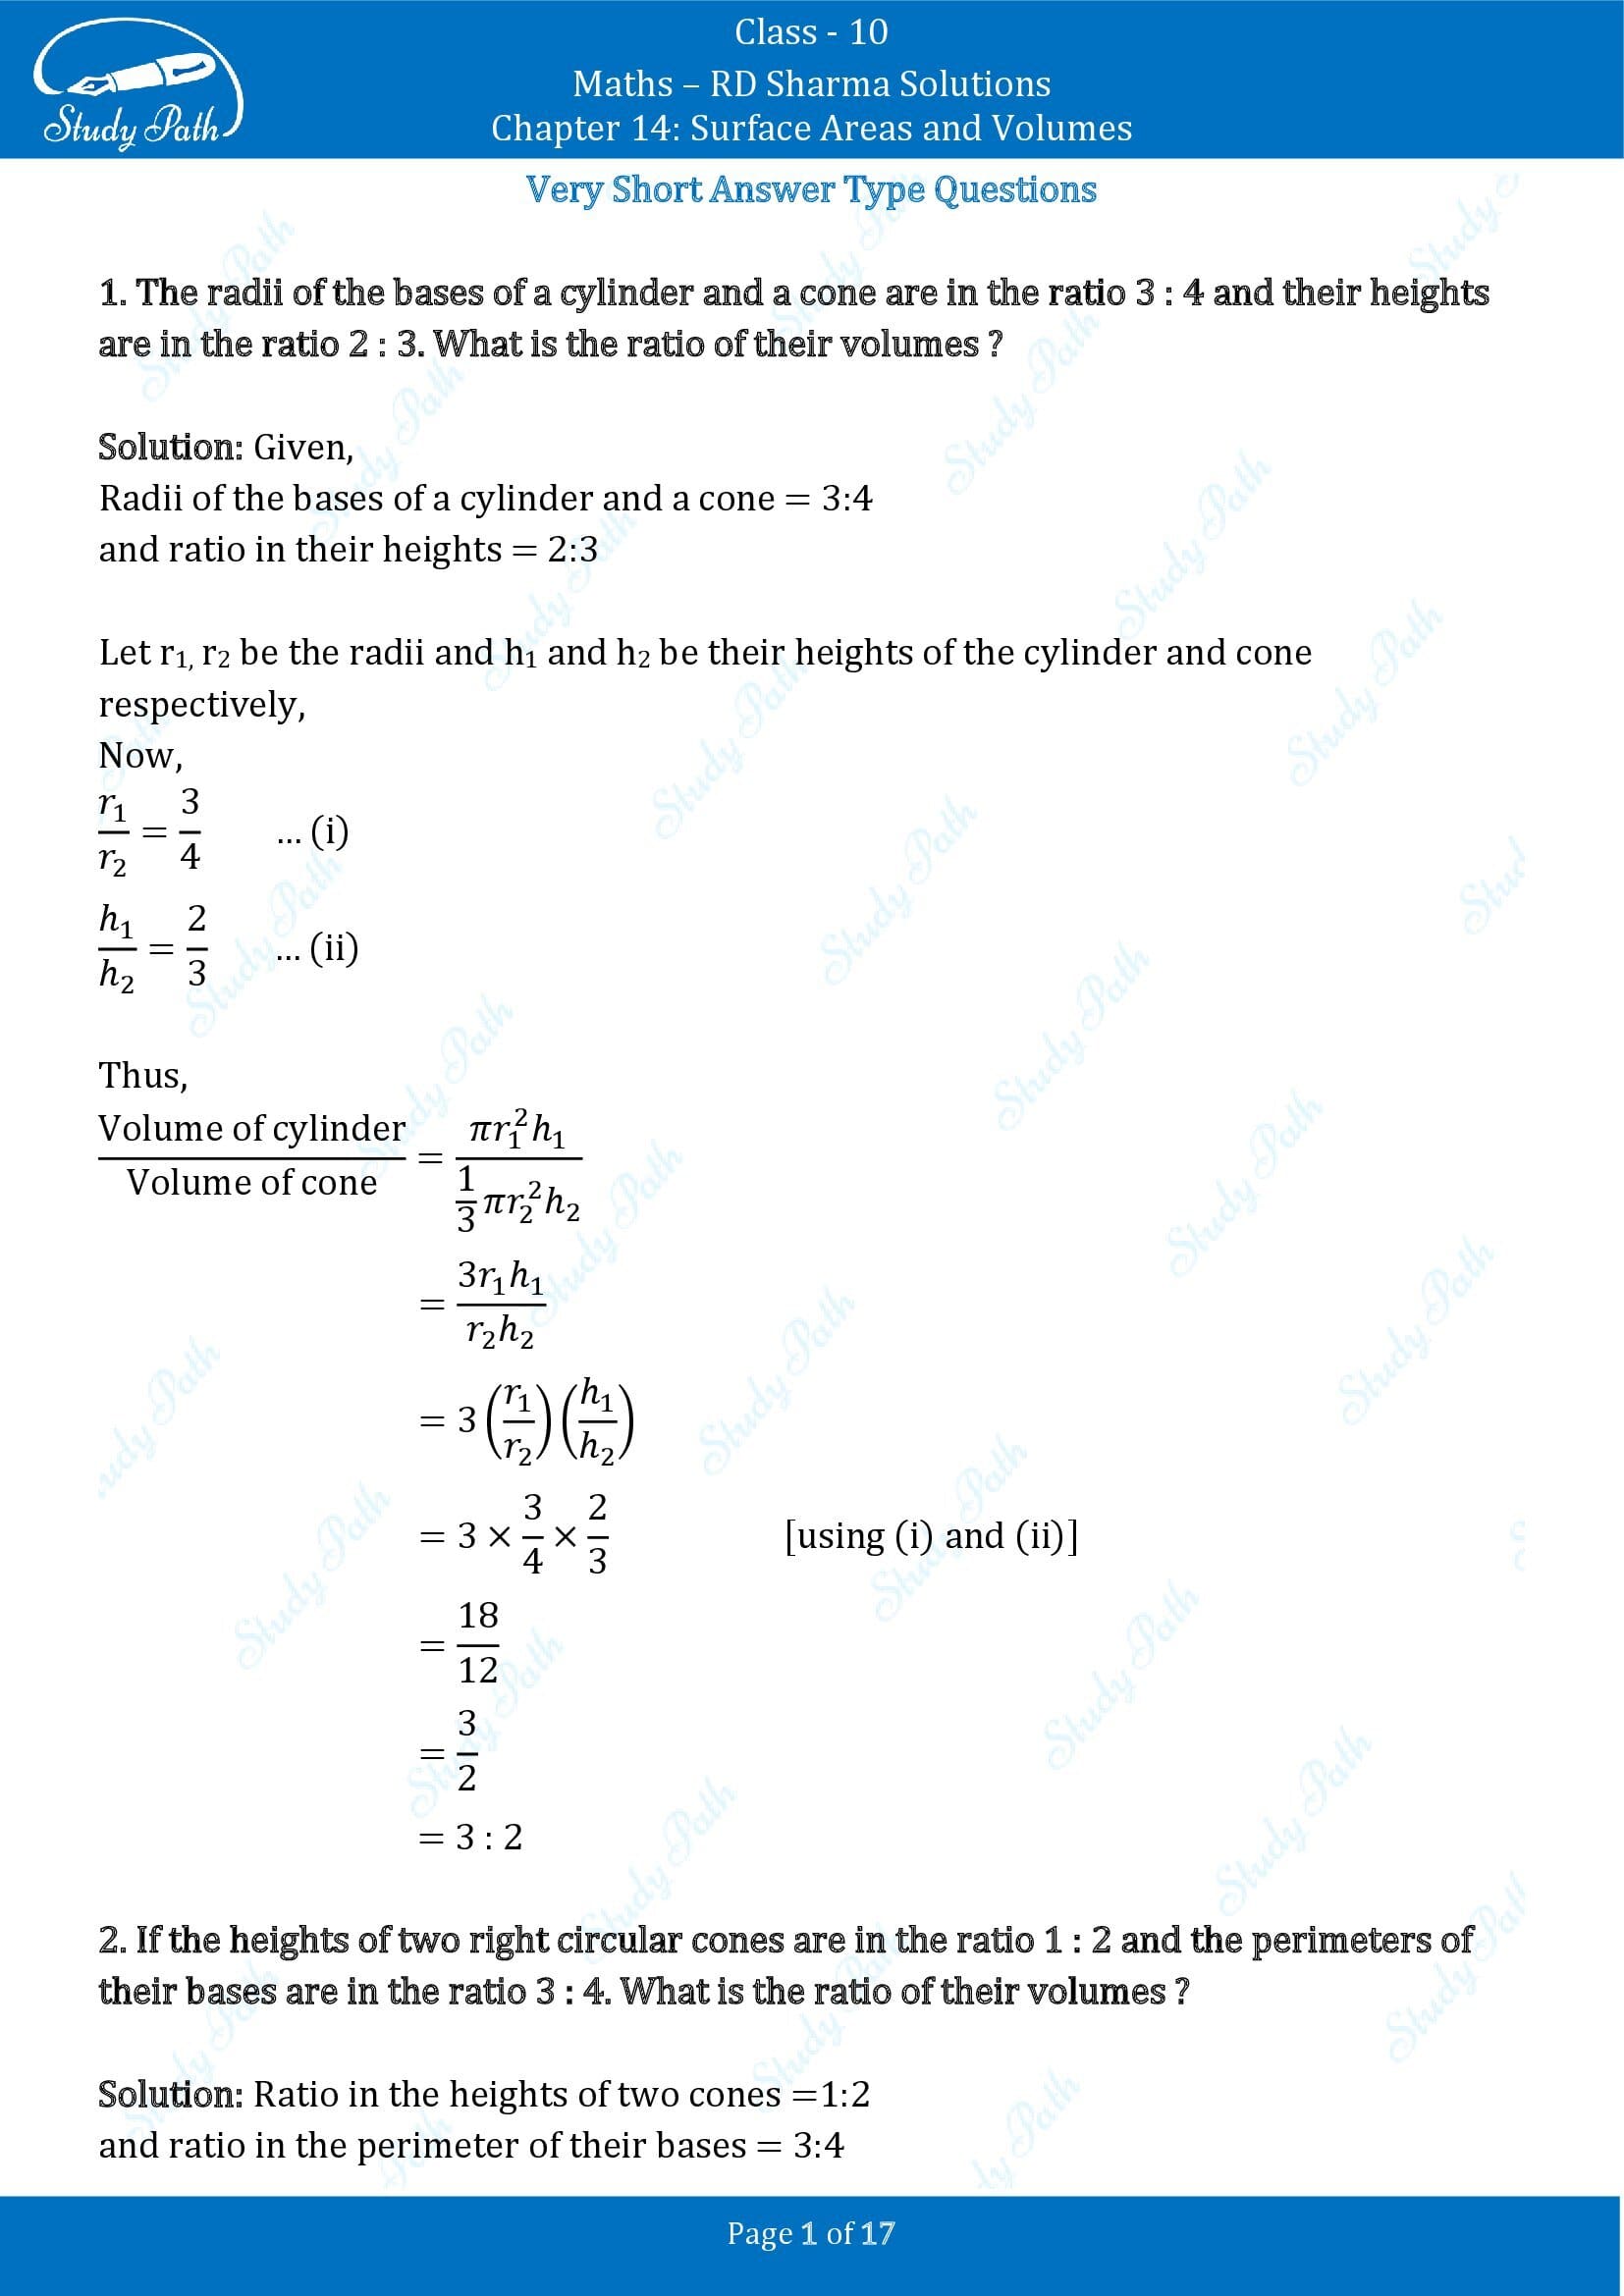 RD Sharma Solutions Class 10 Chapter 14 Surface Areas and Volumes Very Short Answer Type Questions VSAQs 00001